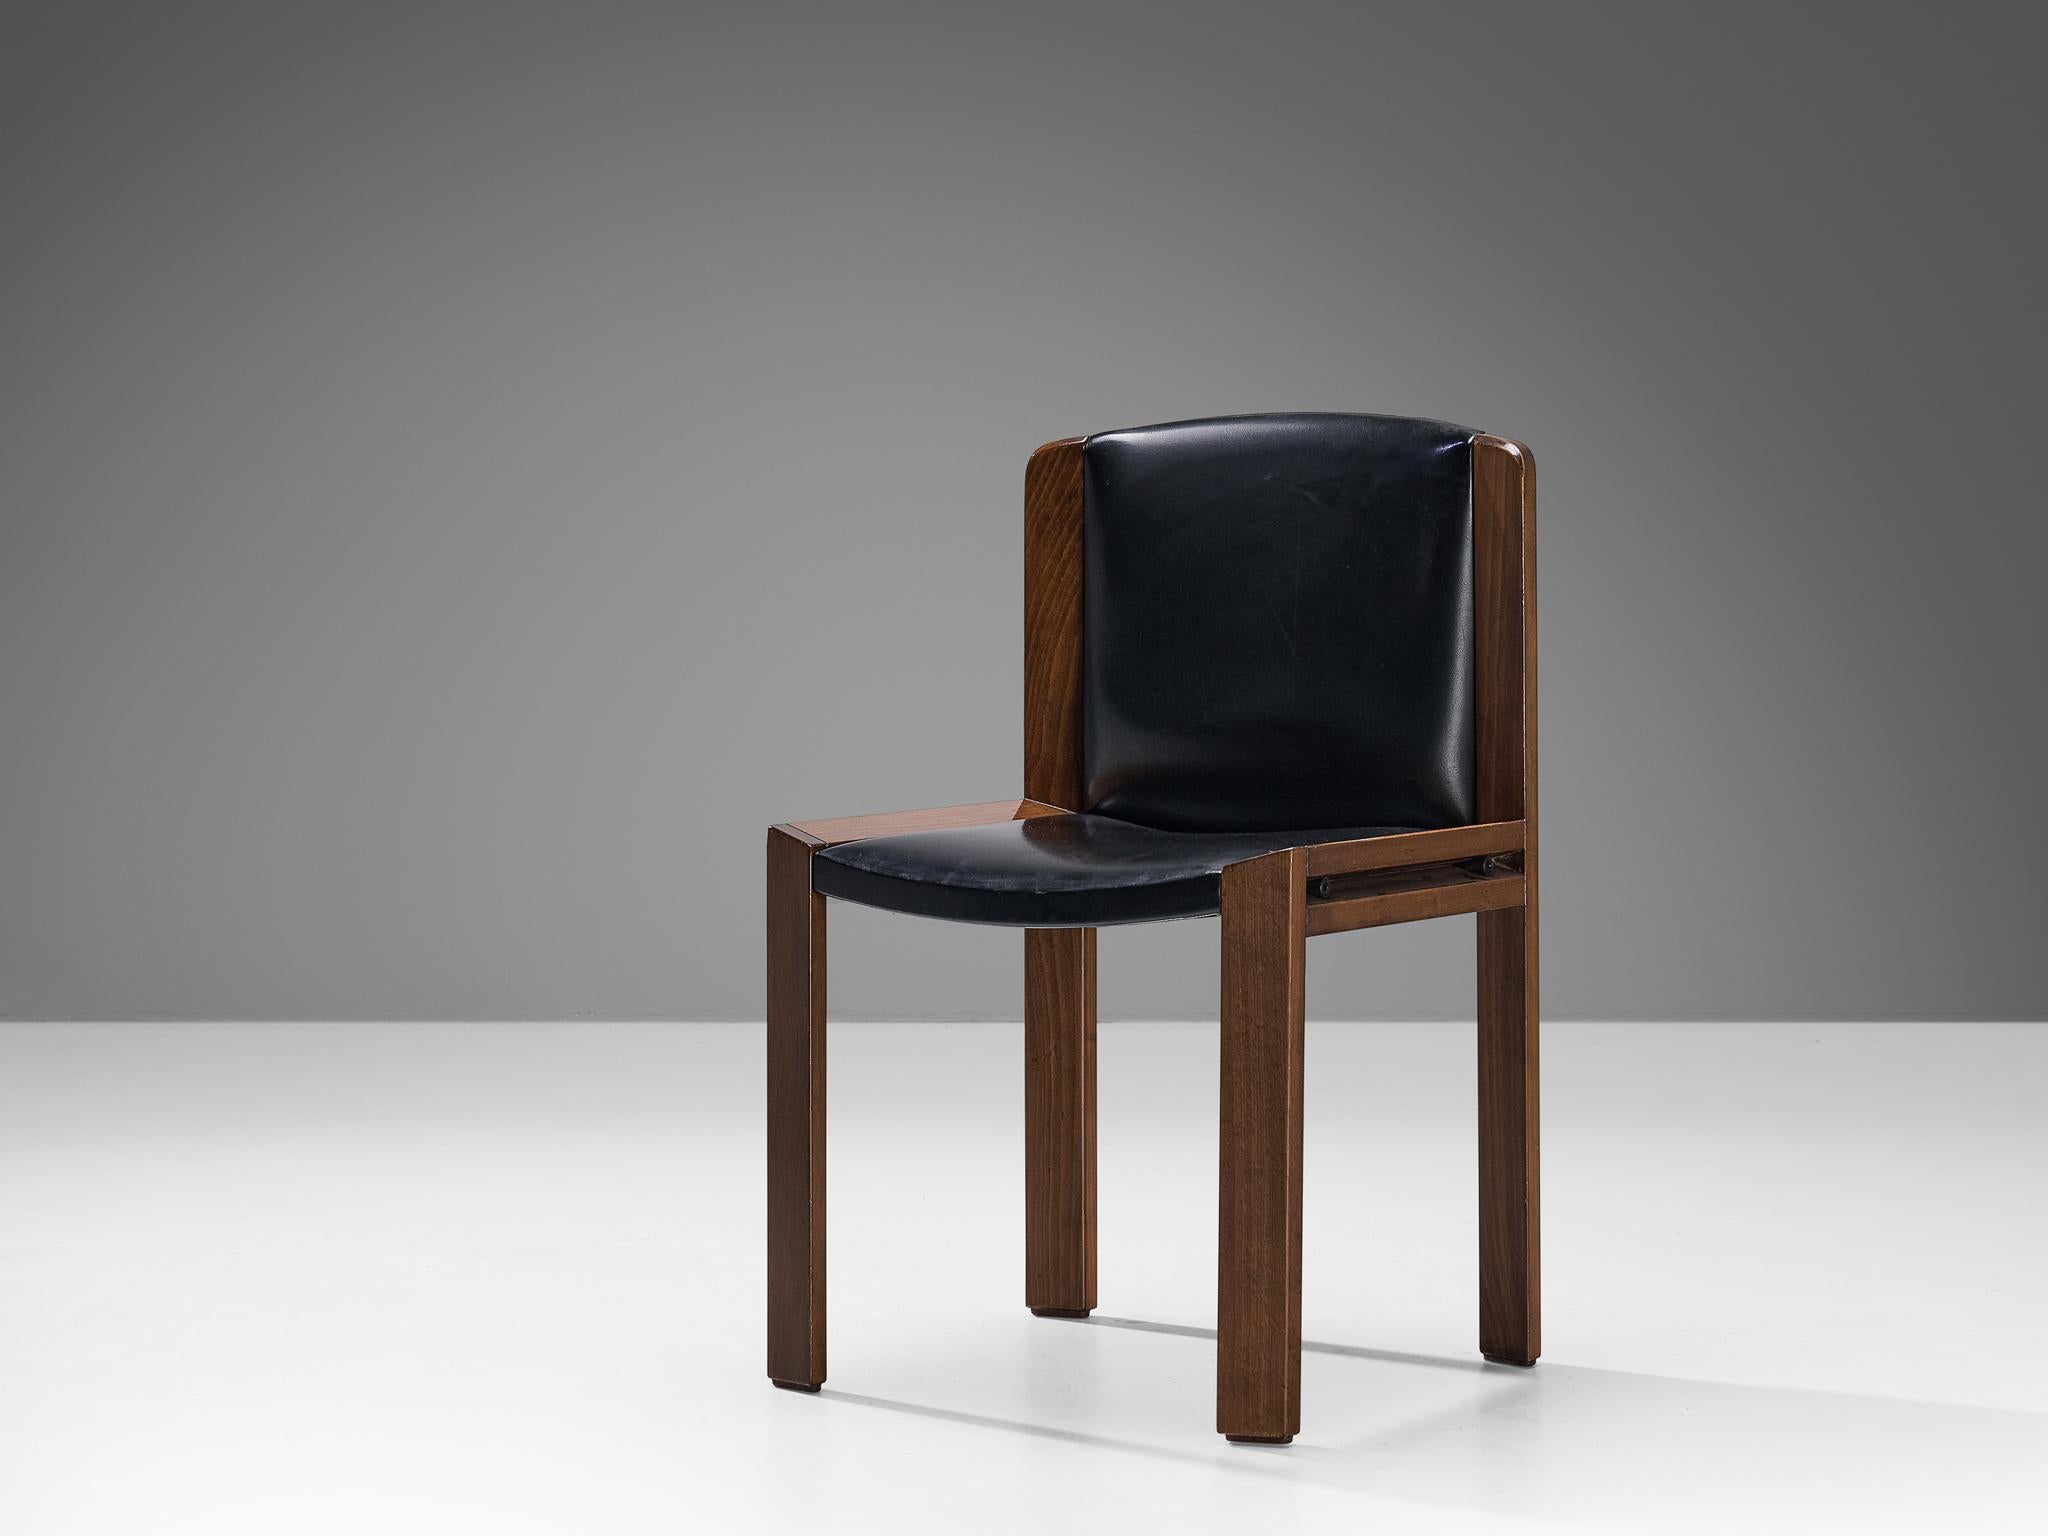 Joe Colombo for Pozzi, dining chair, model '300', leatherette, stained beech, Italy, 1966.

Streamlined dining chair designed by Joe Colombo in 1966. Colombo's fascination with functionality meant he always focused on the user, which lead him to